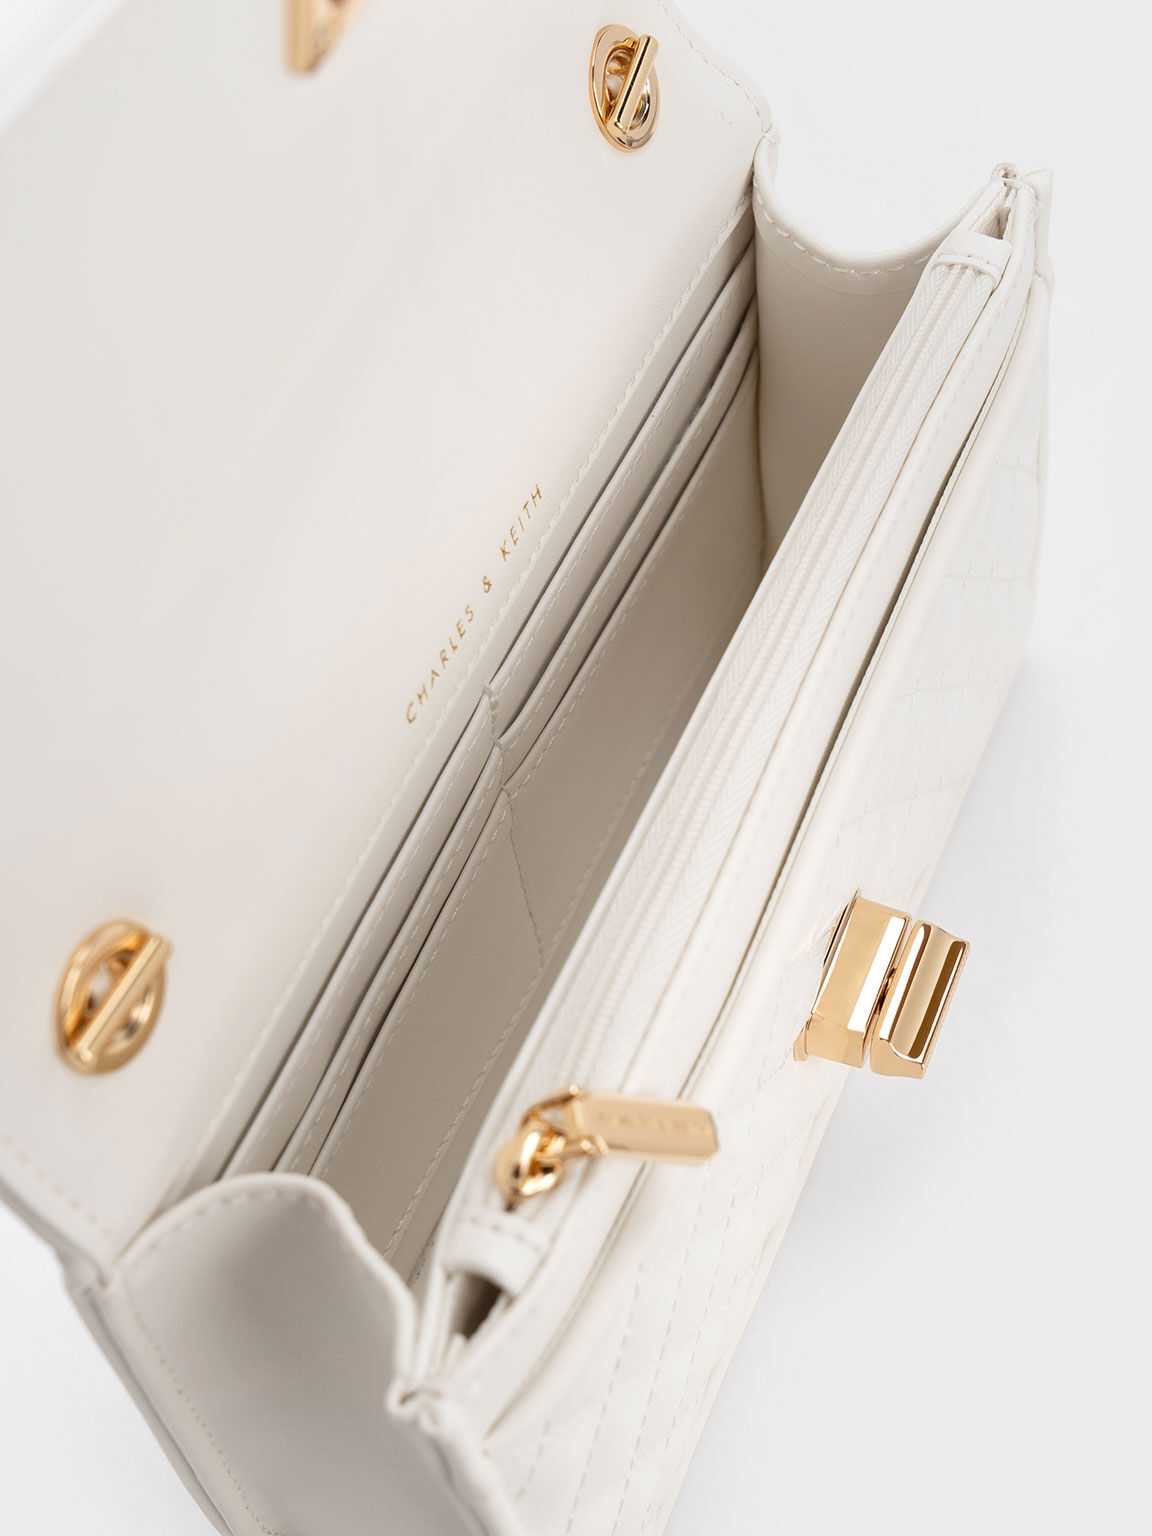 Women's Clutches | Shop Exclusive Styles | CHARLES & KEITH US